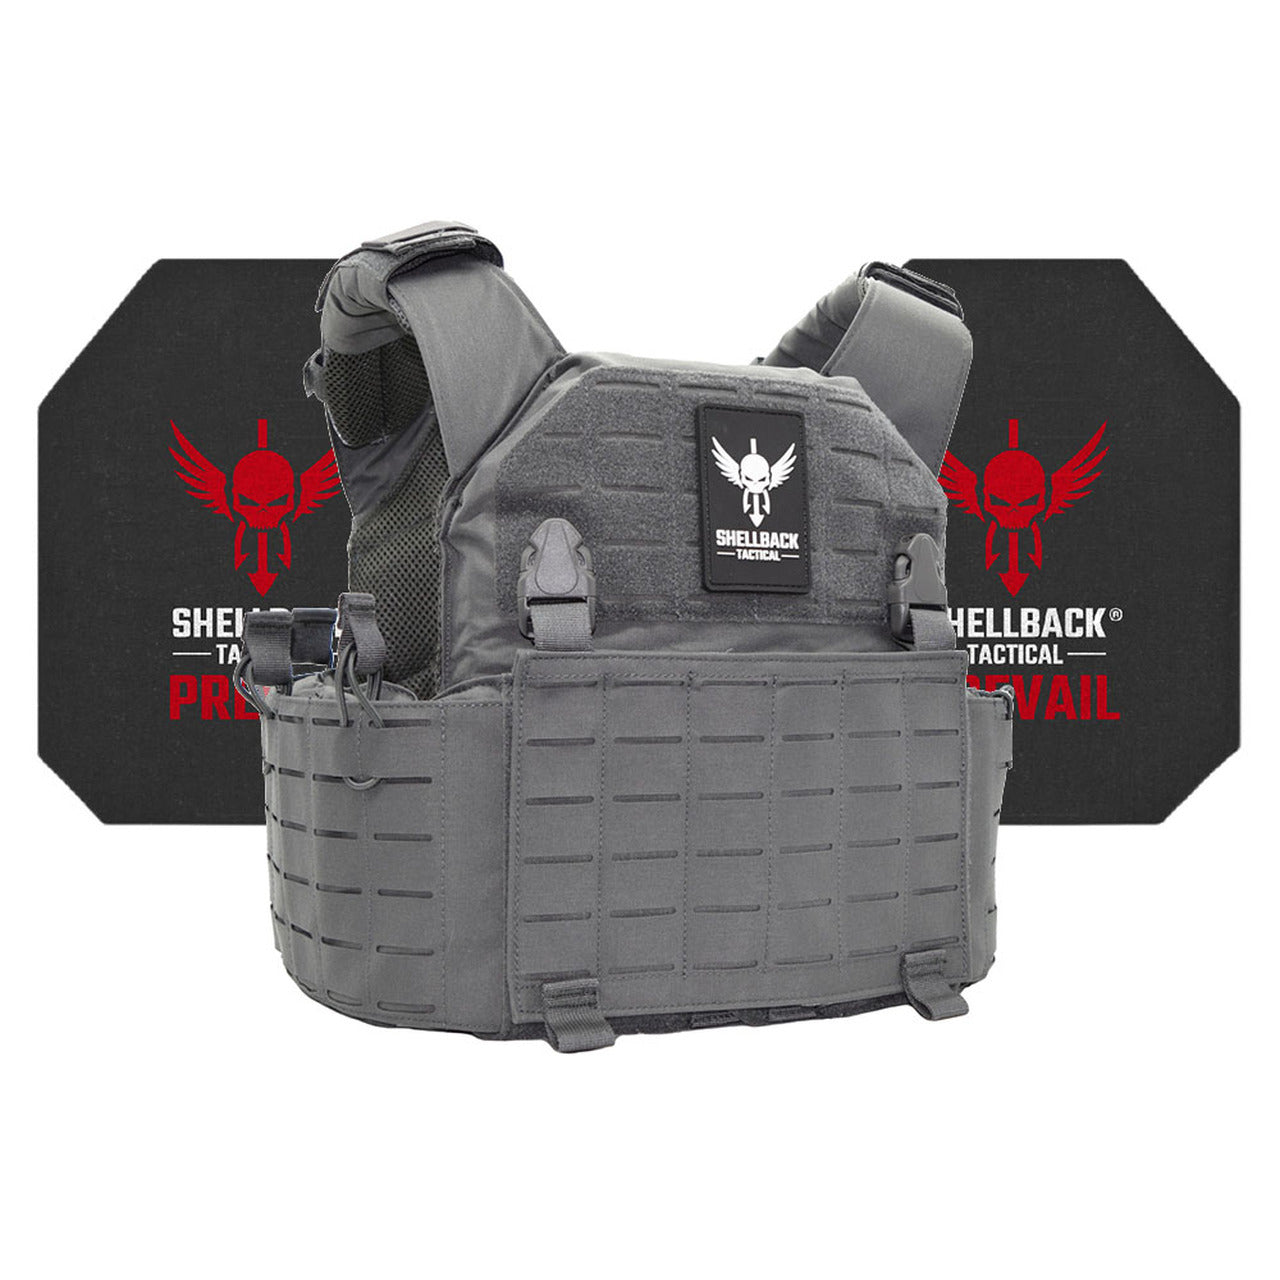 A Shellback Tactical Rampage 2.0 Active Shooter Kit with Level IV 4S17 Plates plate carrier with a red and black logo.